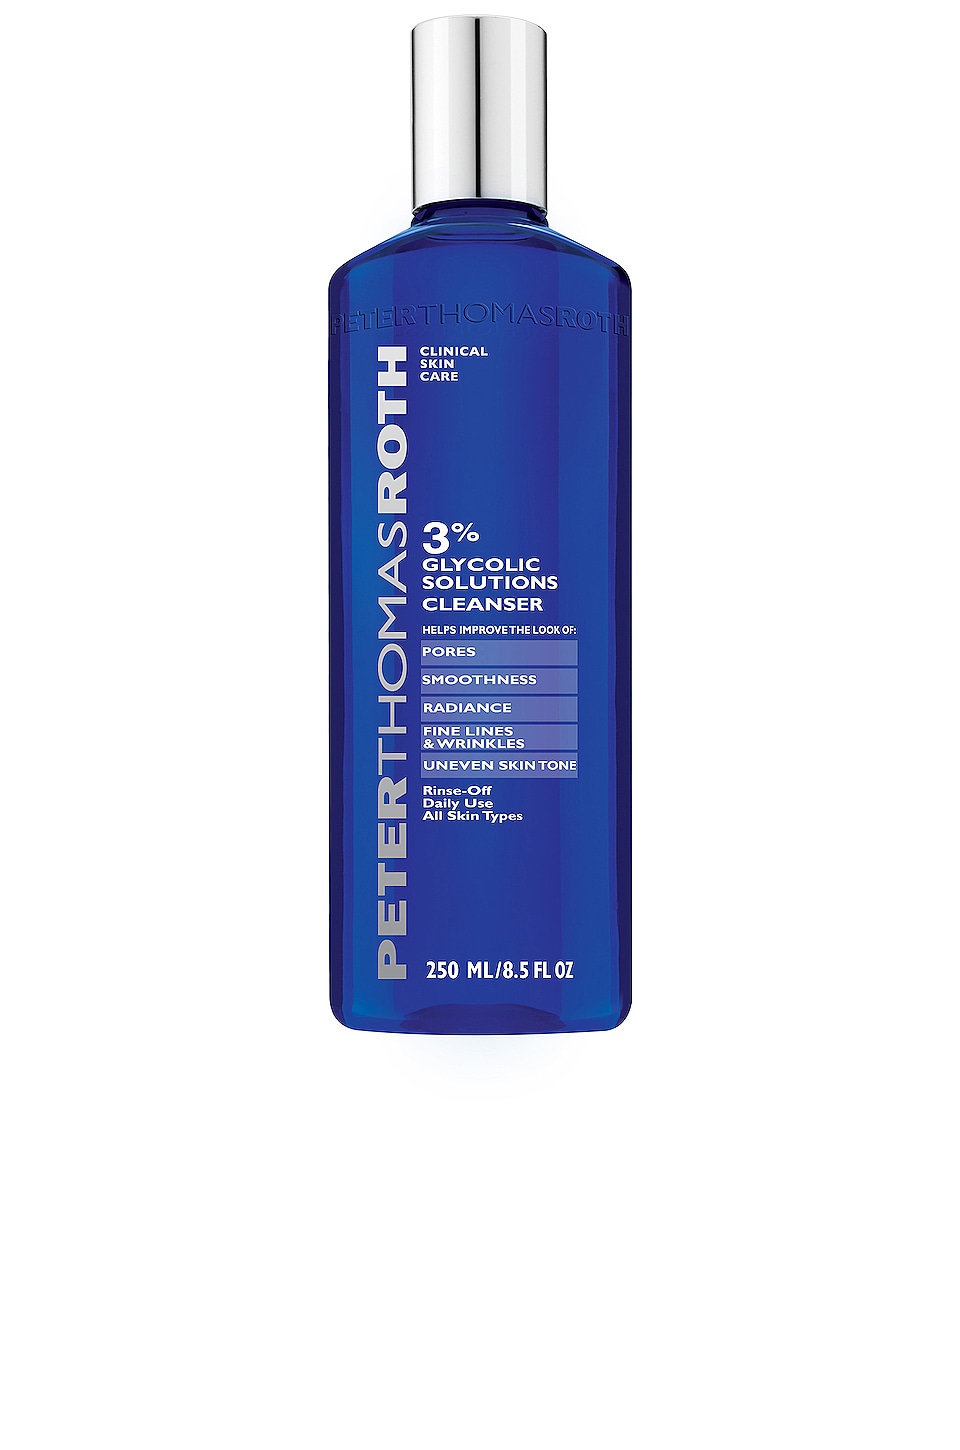 PETER THOMAS ROTH 3% GLYCOLIC SOLUTIONS CLEANSER,PTHO-WU91